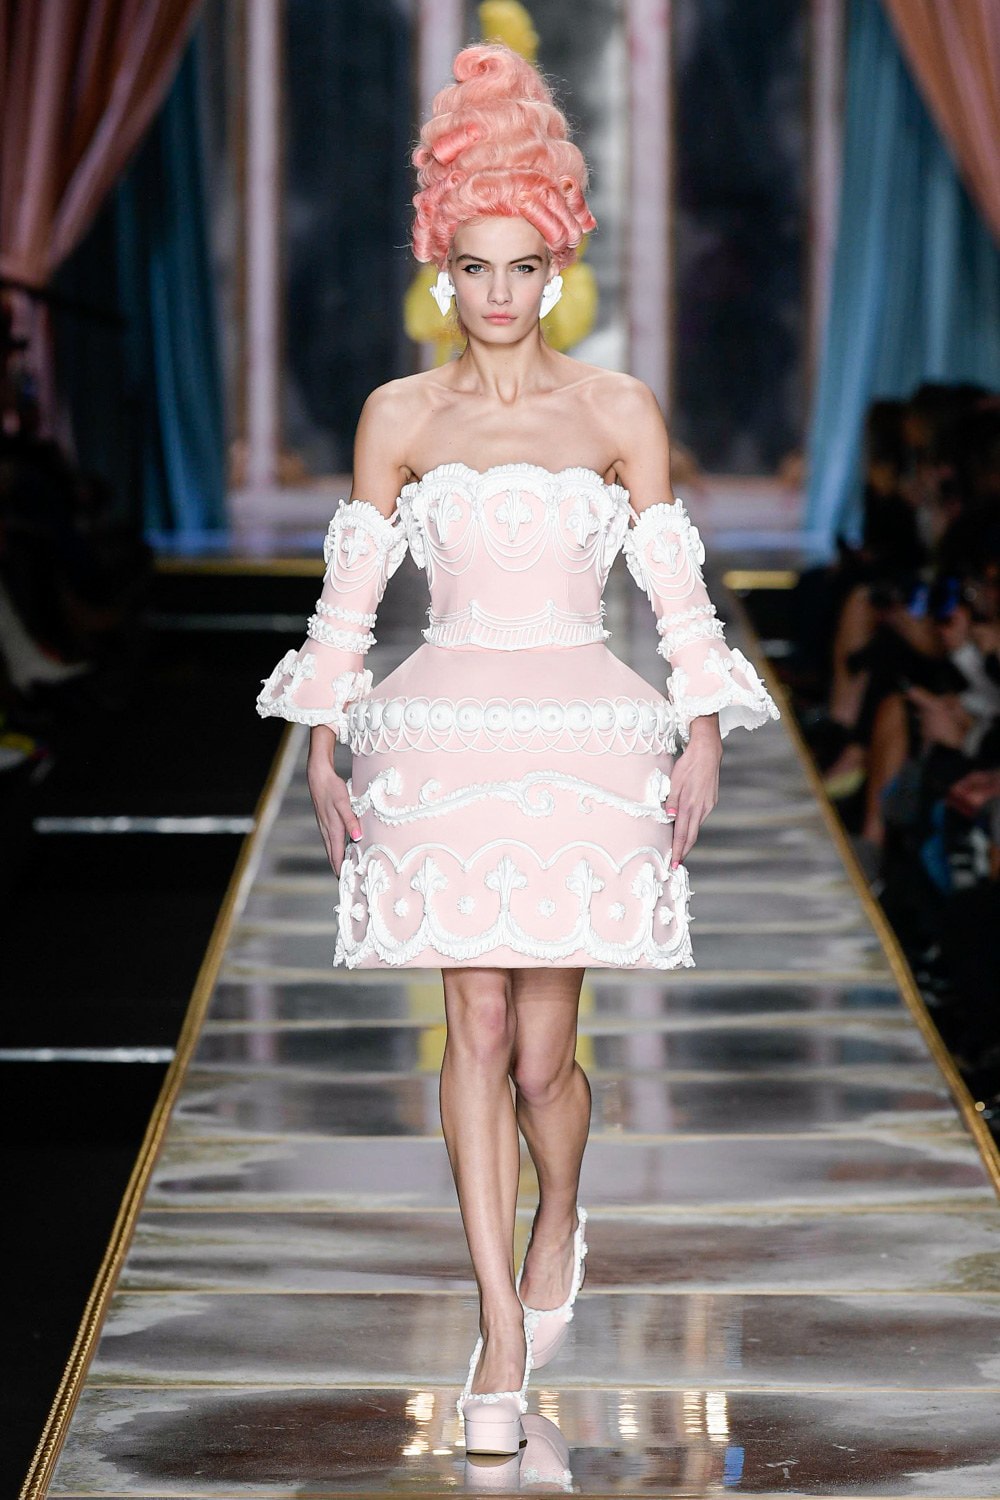 Moschino Fall/Winter 2020 Collection Runway Show Cake Dress Pink